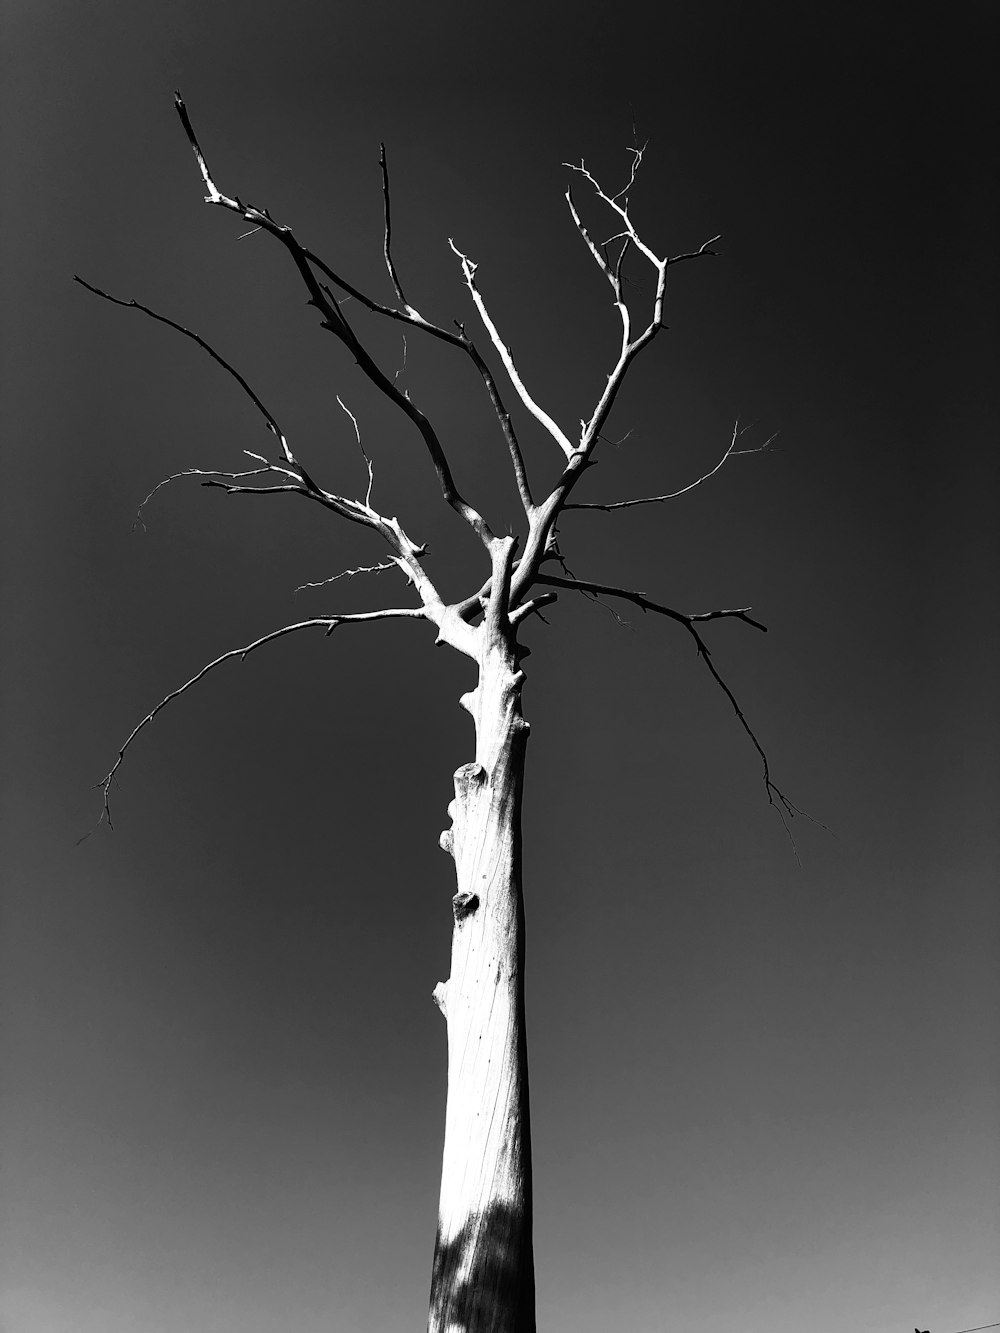 leafless tree with white background